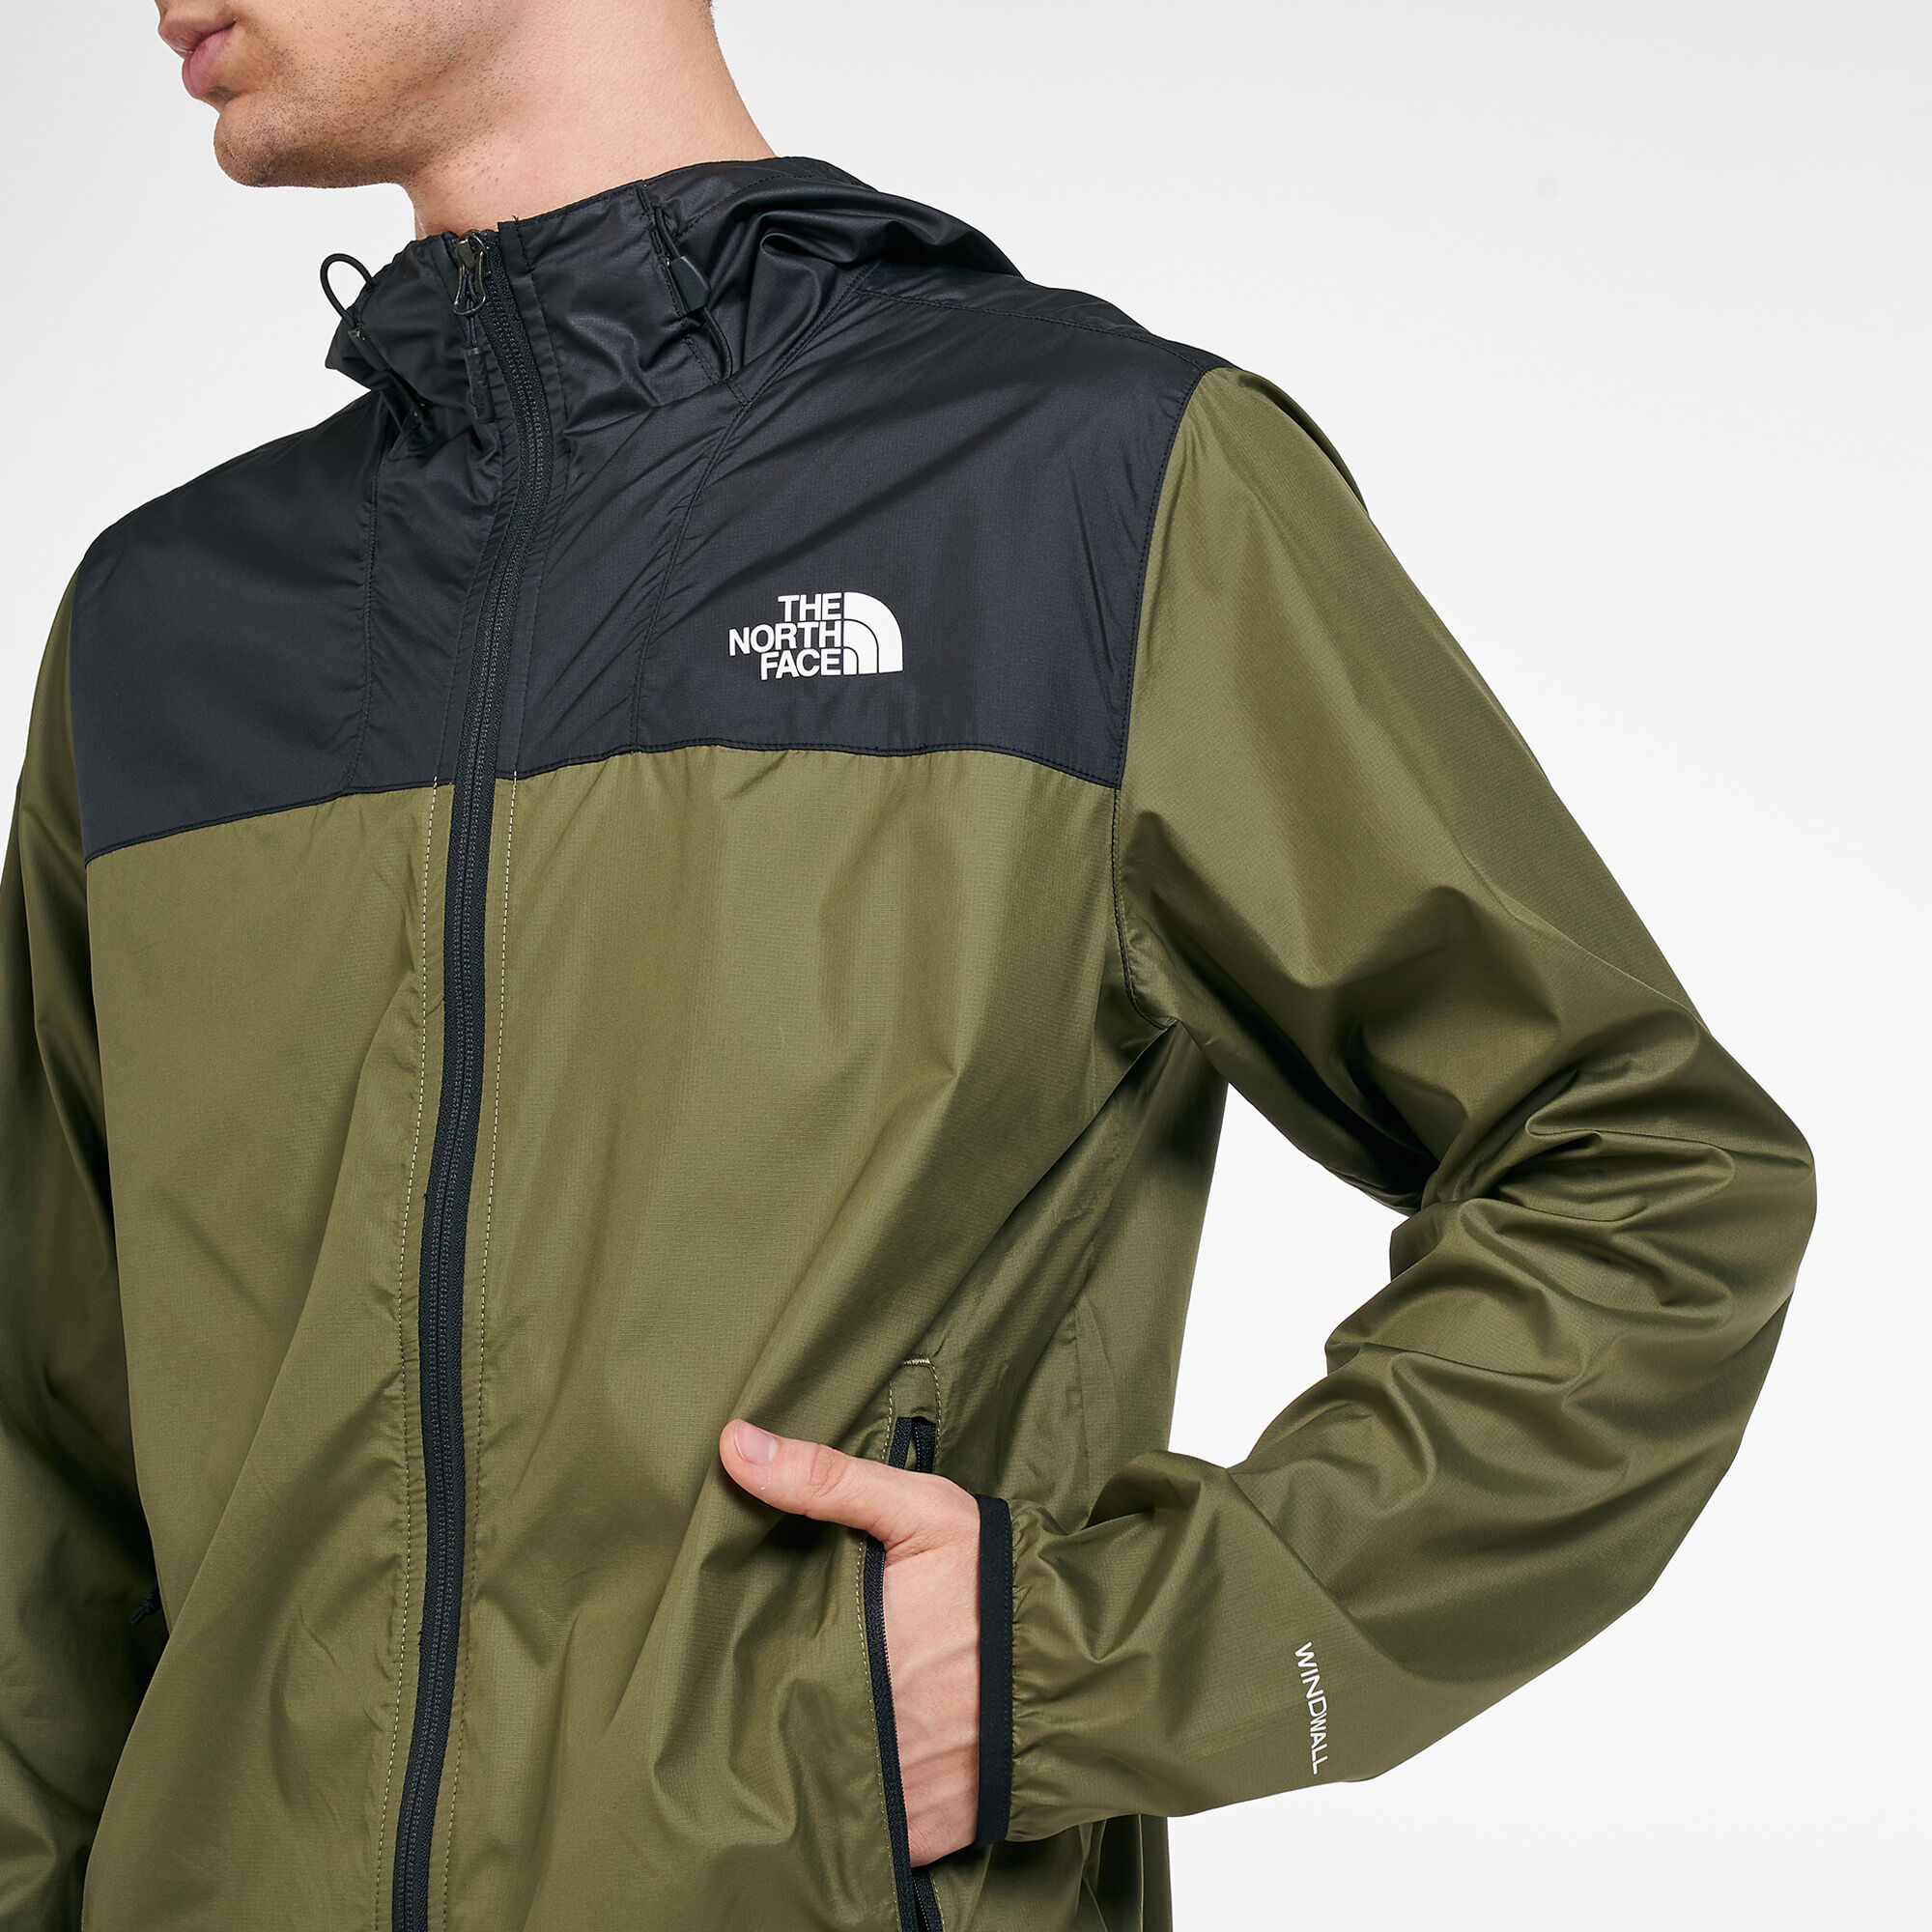 Buy The North Face Men's Cyclone 2 Hooded Wind Jacket in Dubai, UAE | SSS